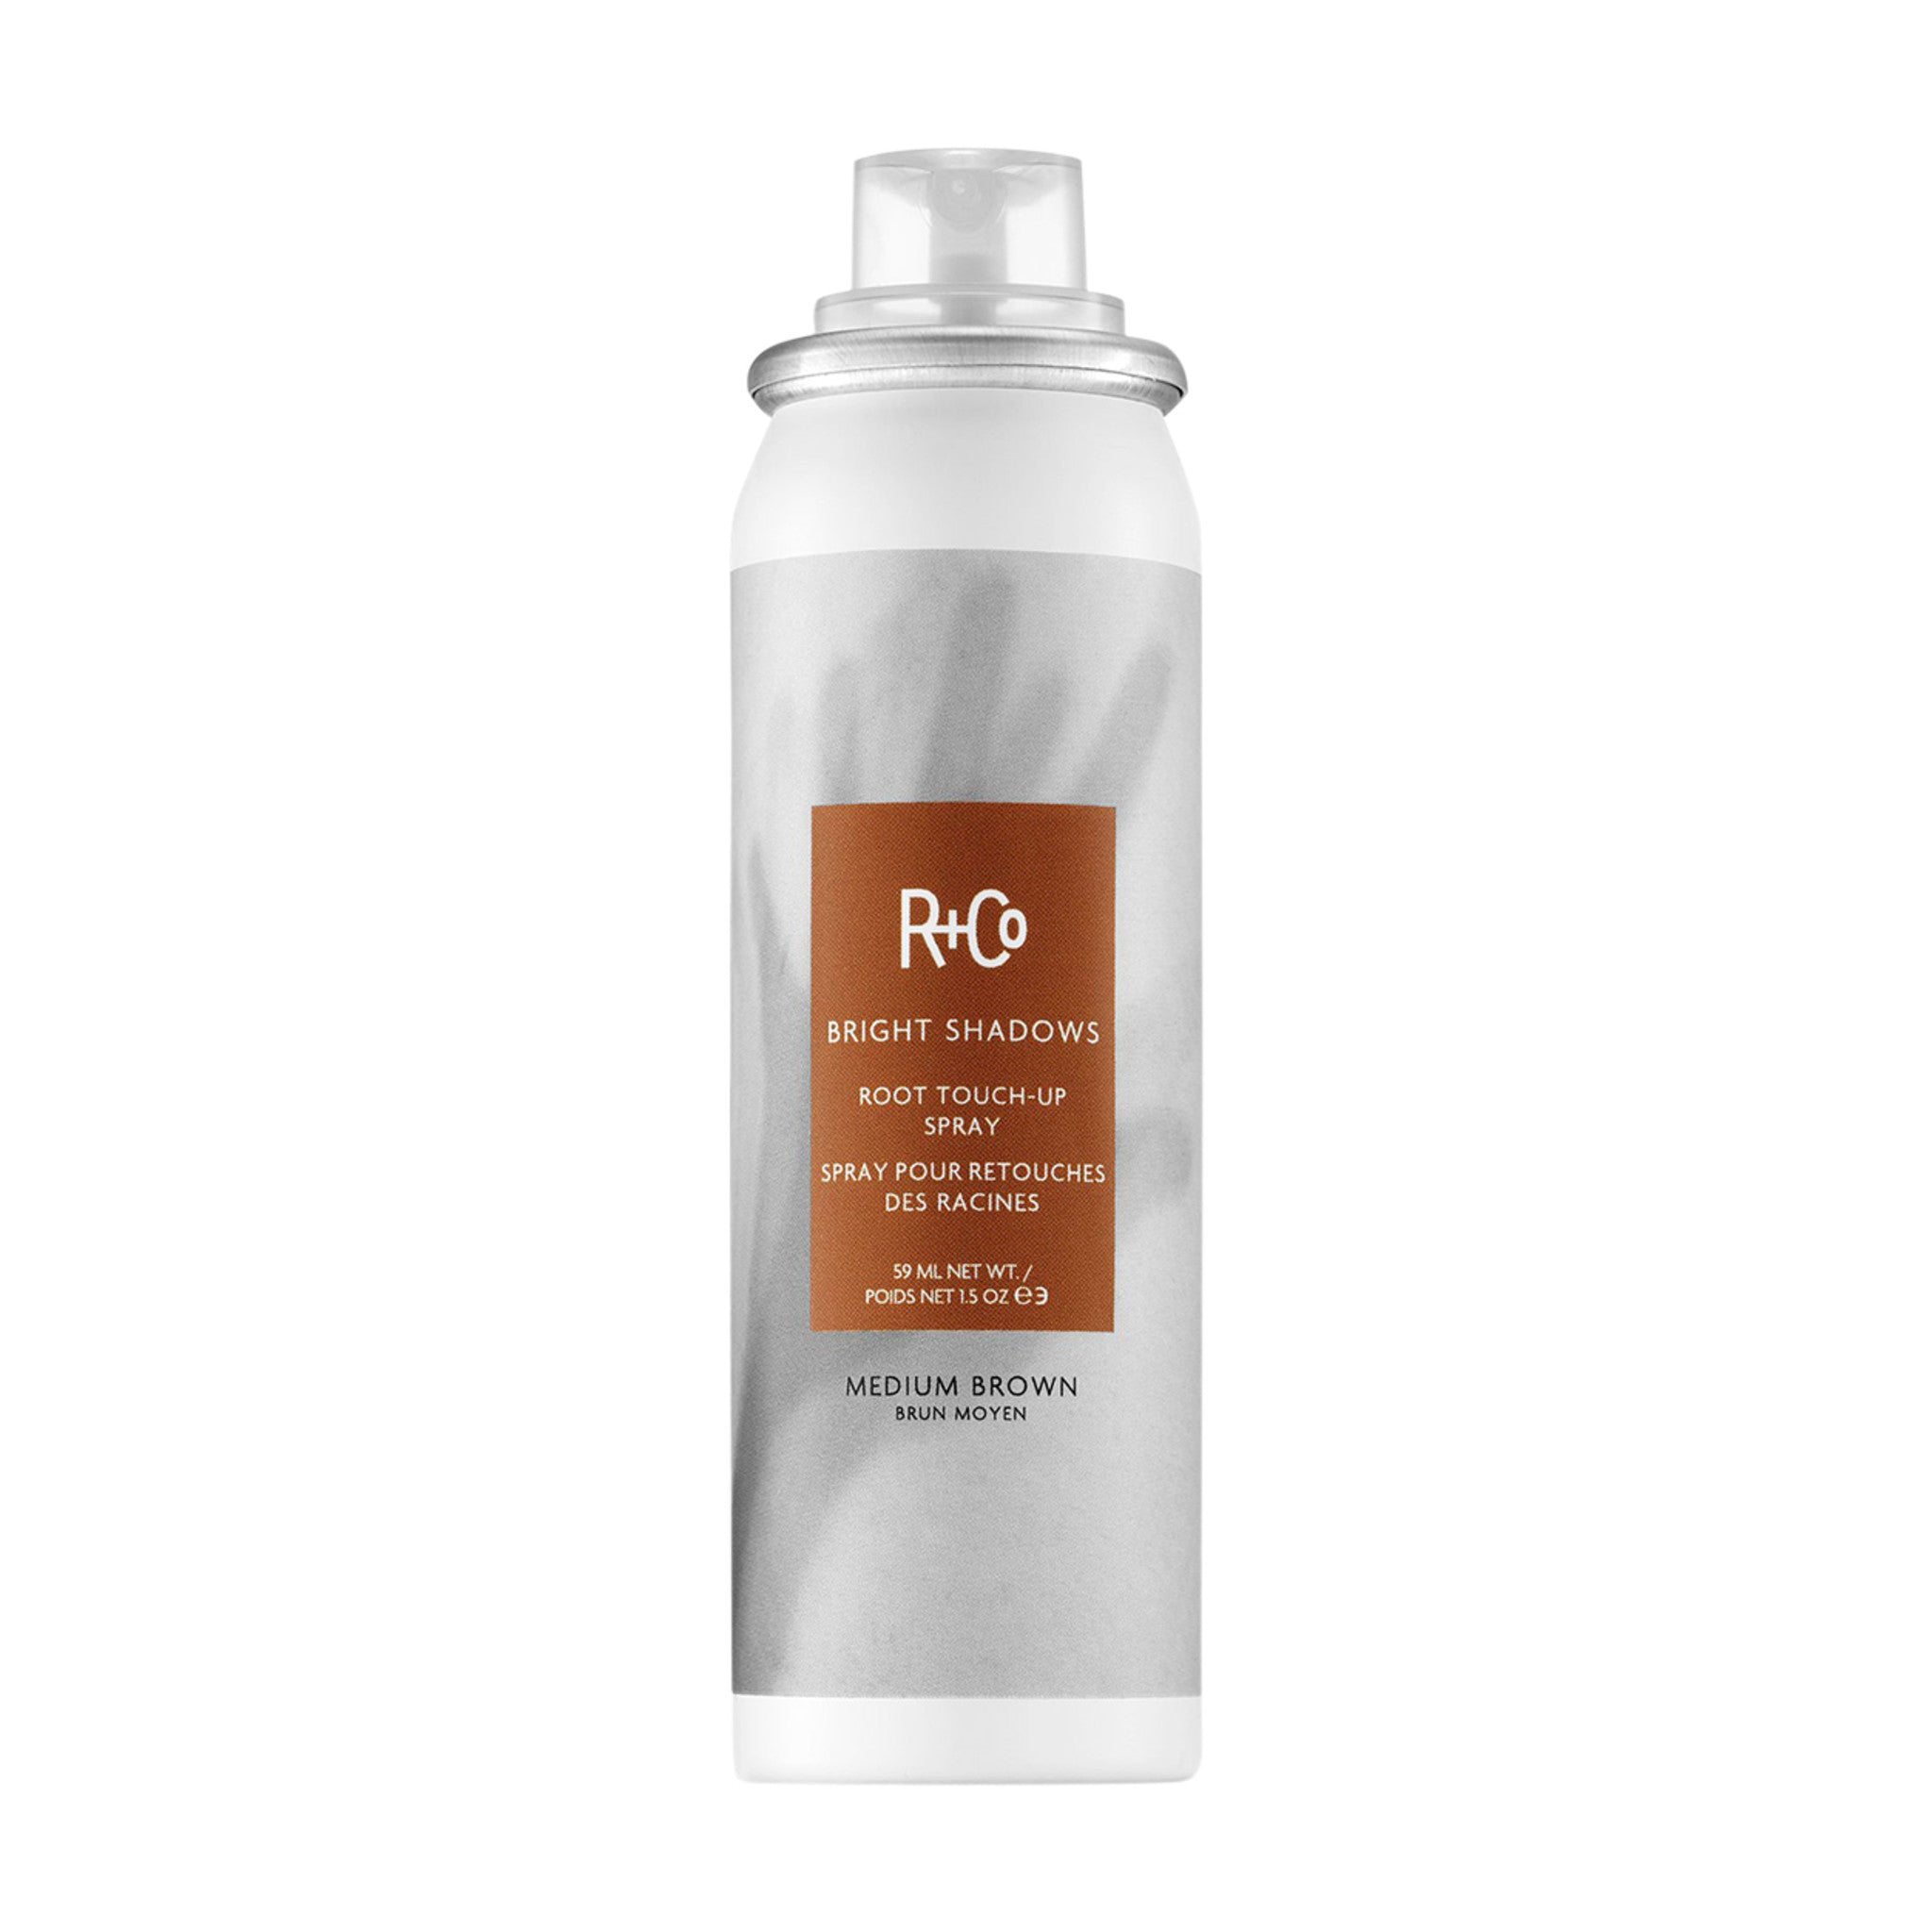 R+Co Bright Shadows Root Touch Up Spray - Medium Brown main image. This product is for brown hair